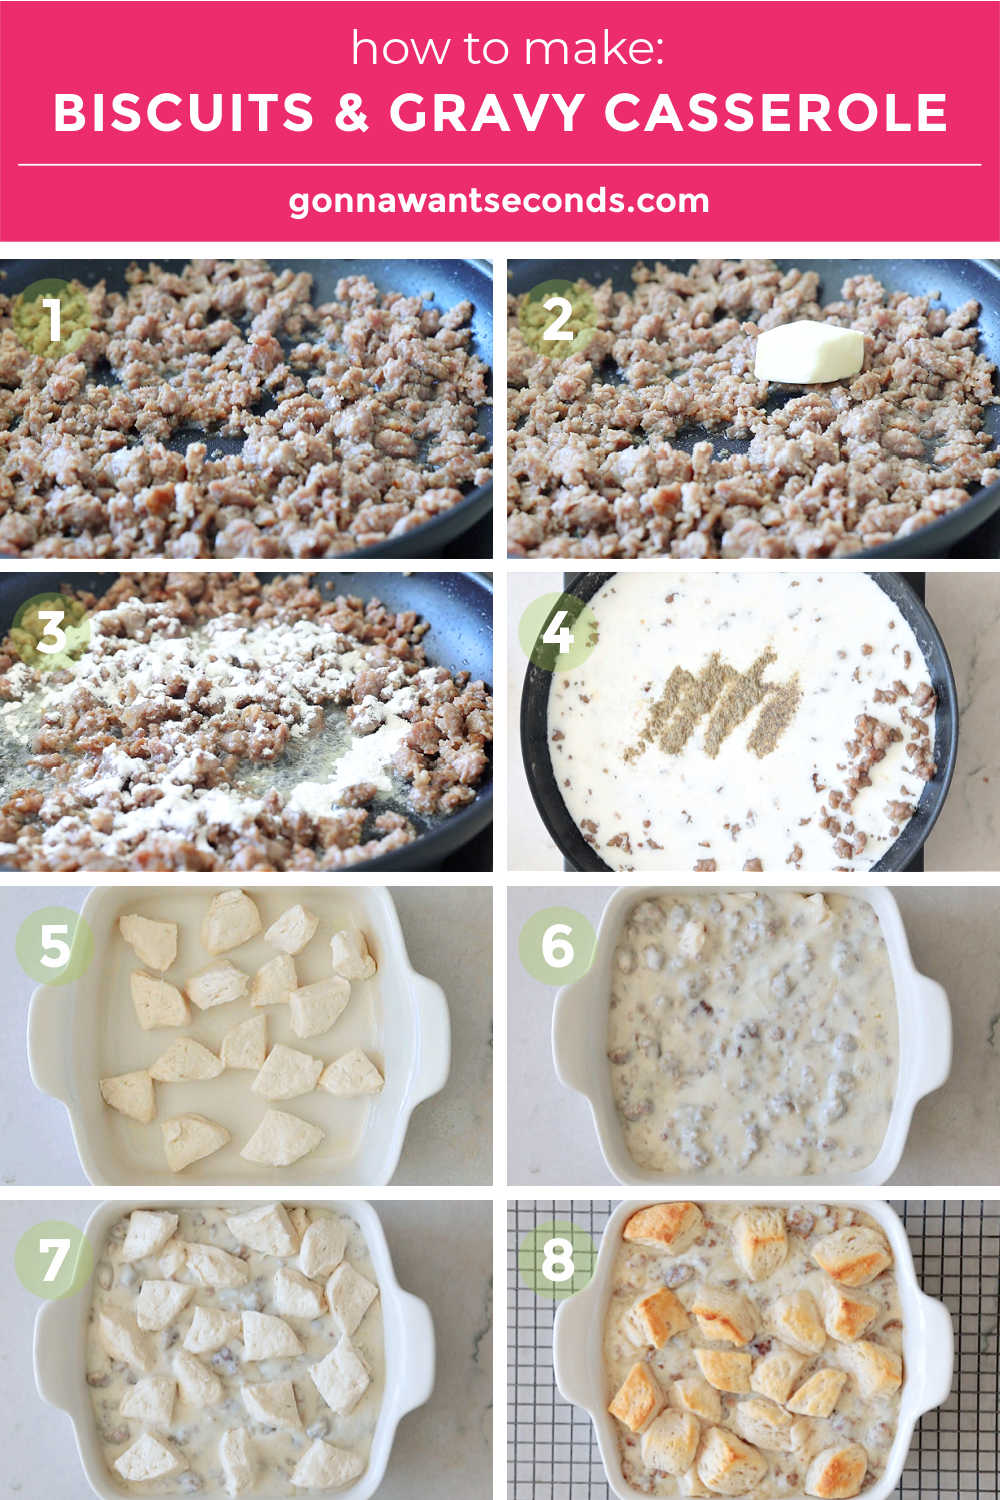 How to make Biscuits and Gravy Casserole